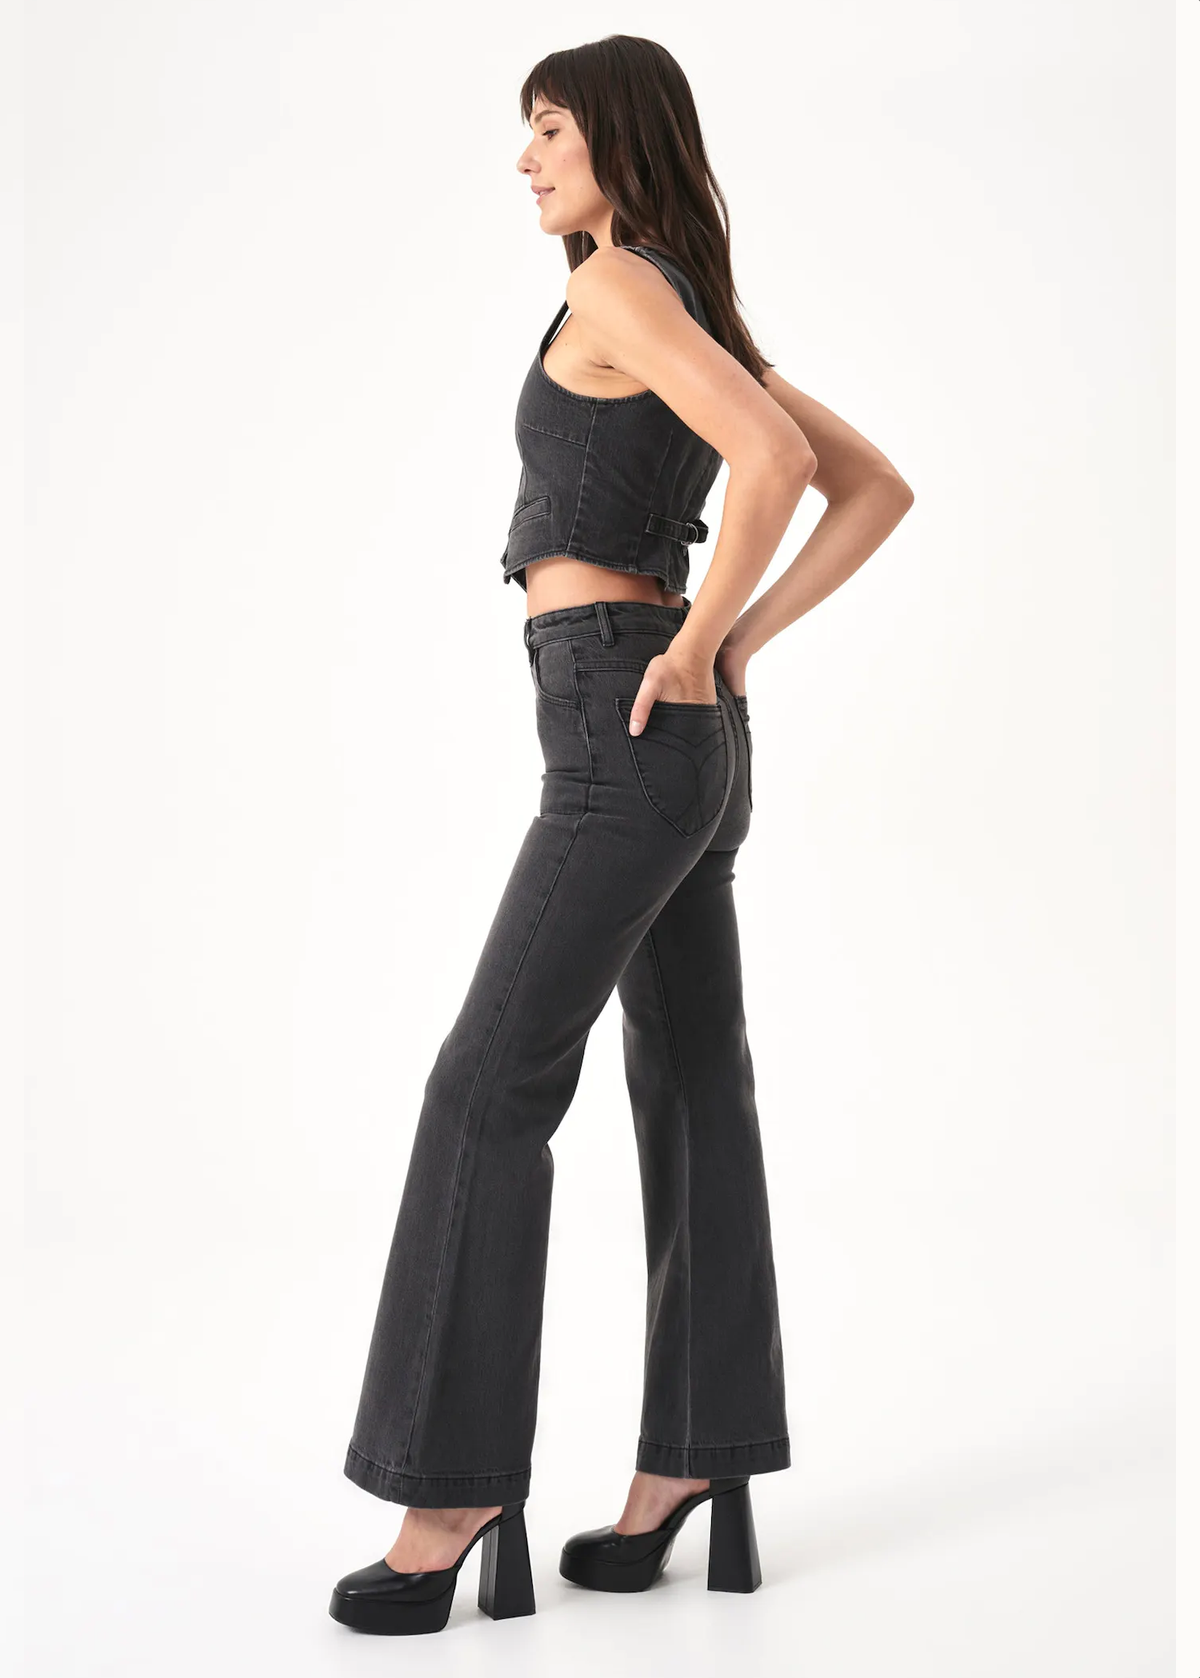 70s inspired faded Brad Black High Rise Waist Stretch Denim Eastcoast flares by Rolla's Jeans